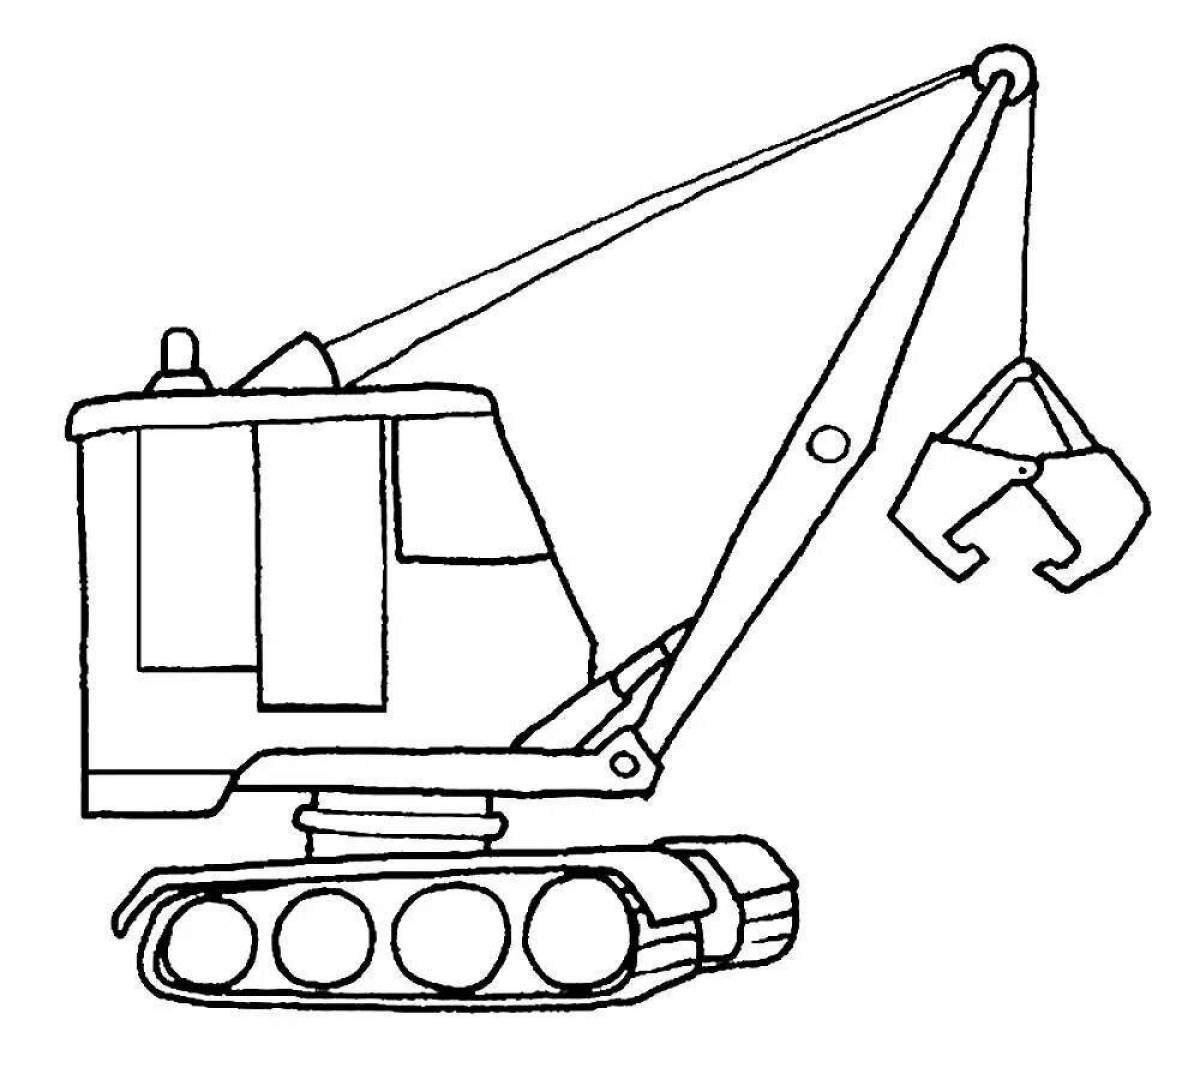 Coloring page unusual special equipment